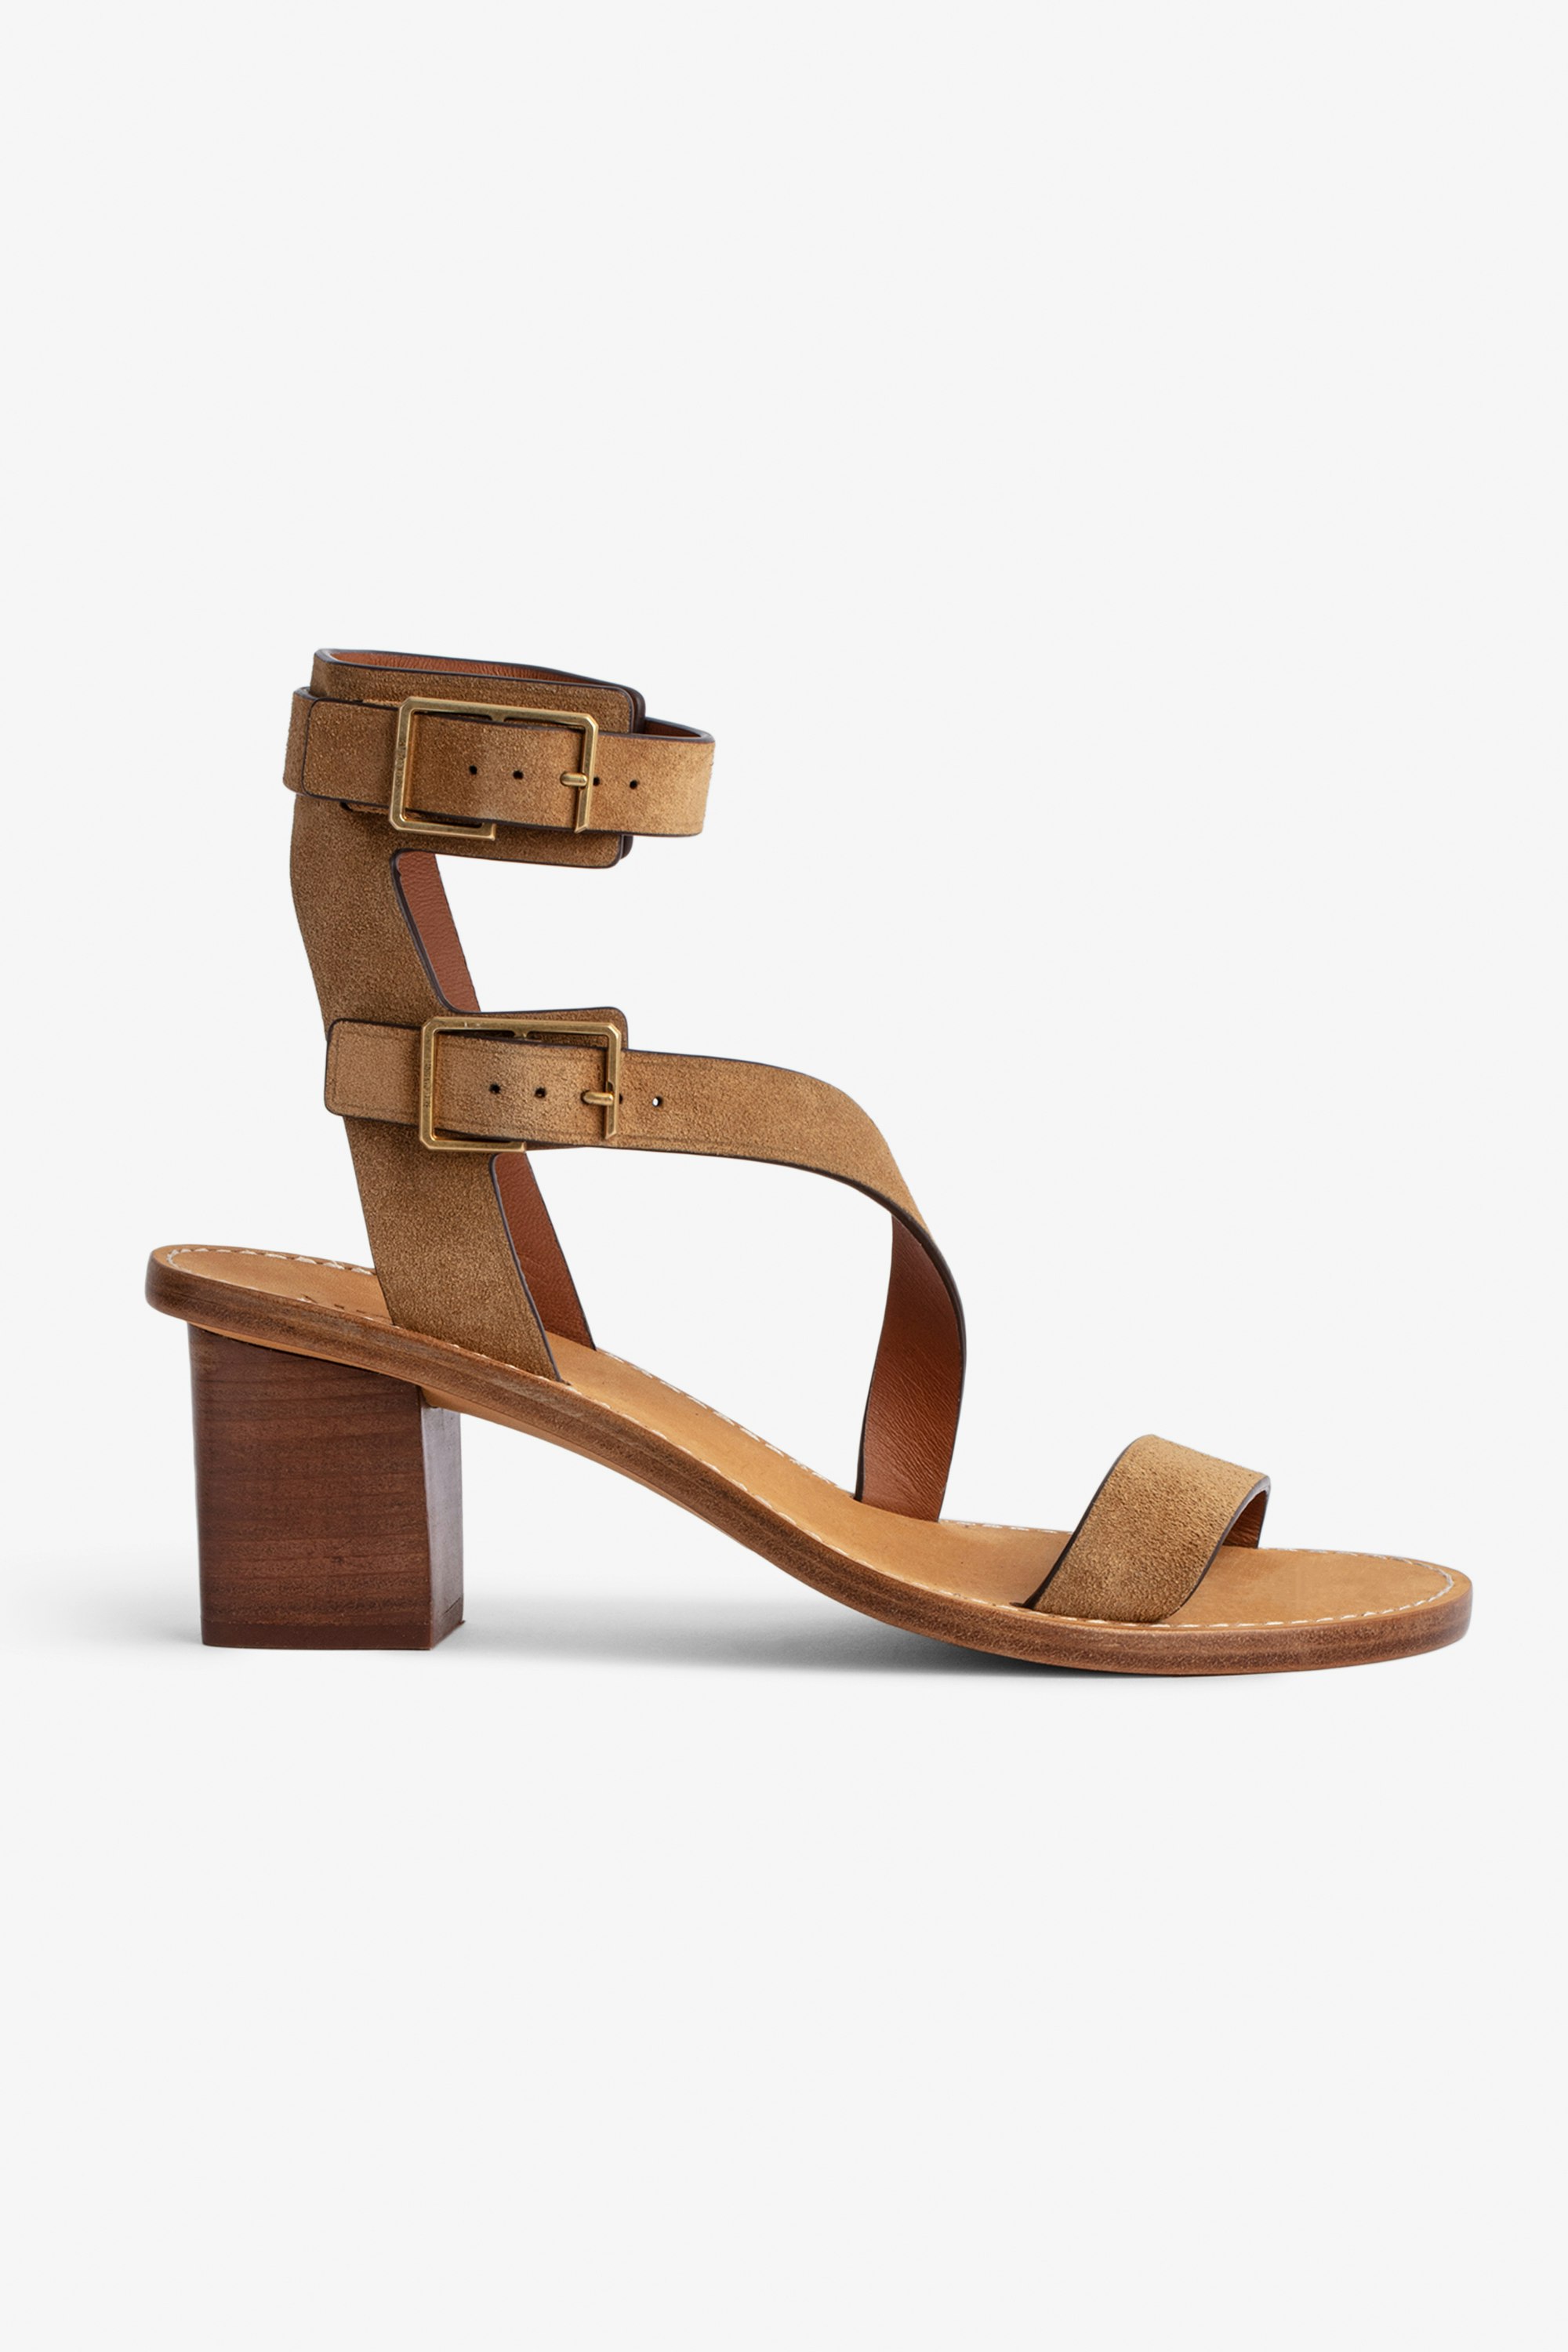 Cecilia Caprese Sandals - Women's high-top brown suede sandals with straps and C-shaped buckles